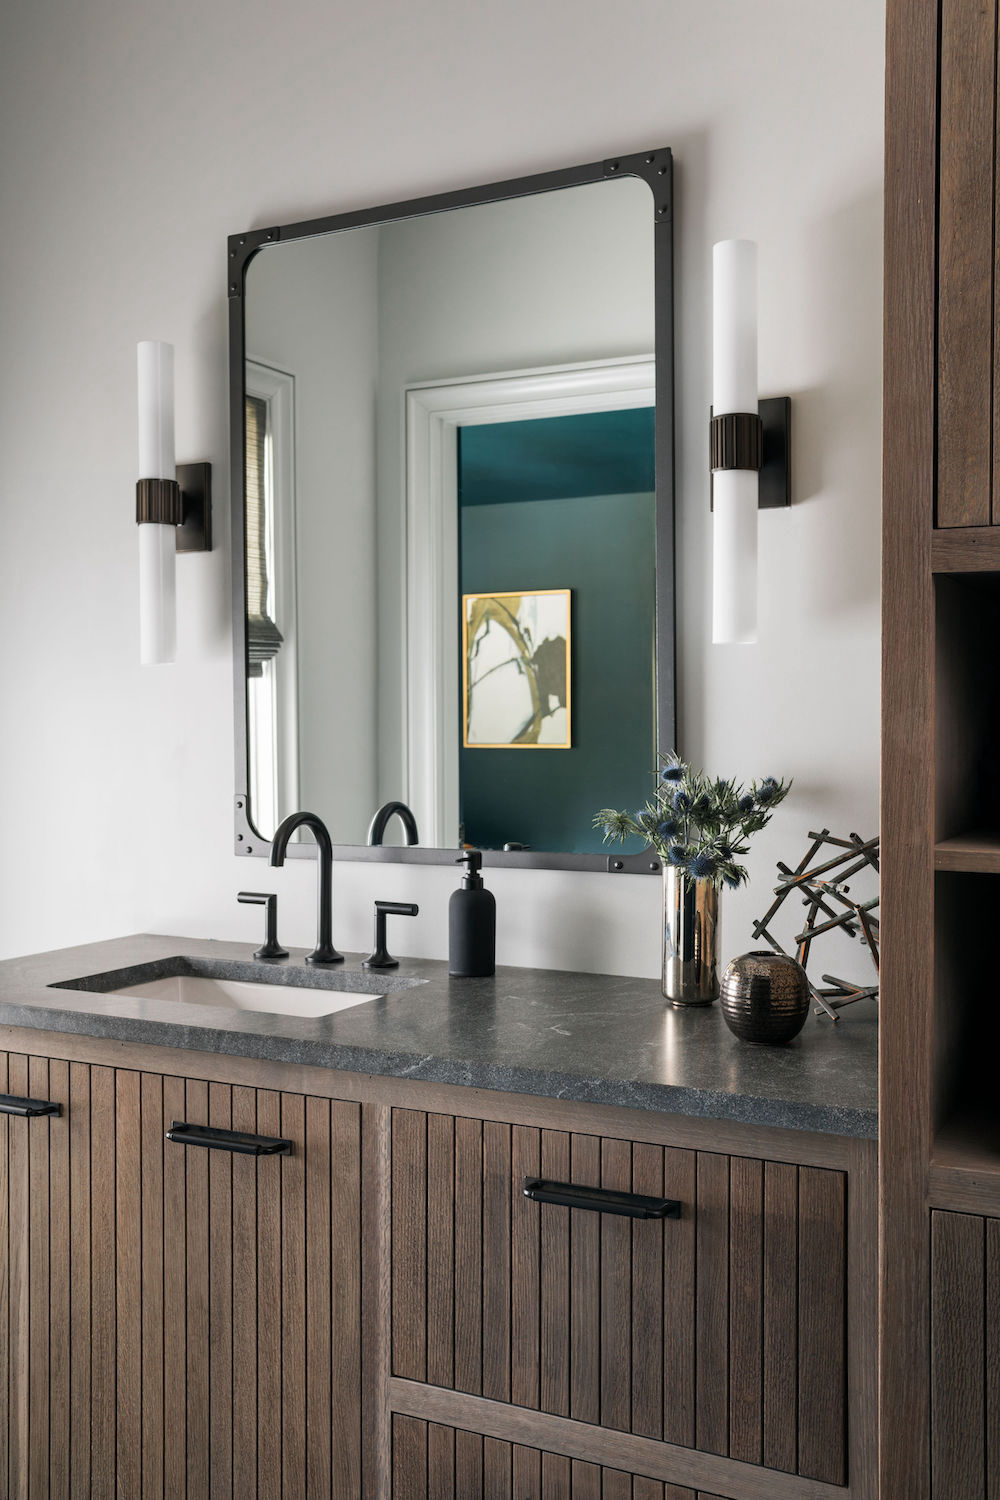 brown wood bathroom cabinets with black faucet and hardware. Construction Resources provided countertop fabrication and installation.